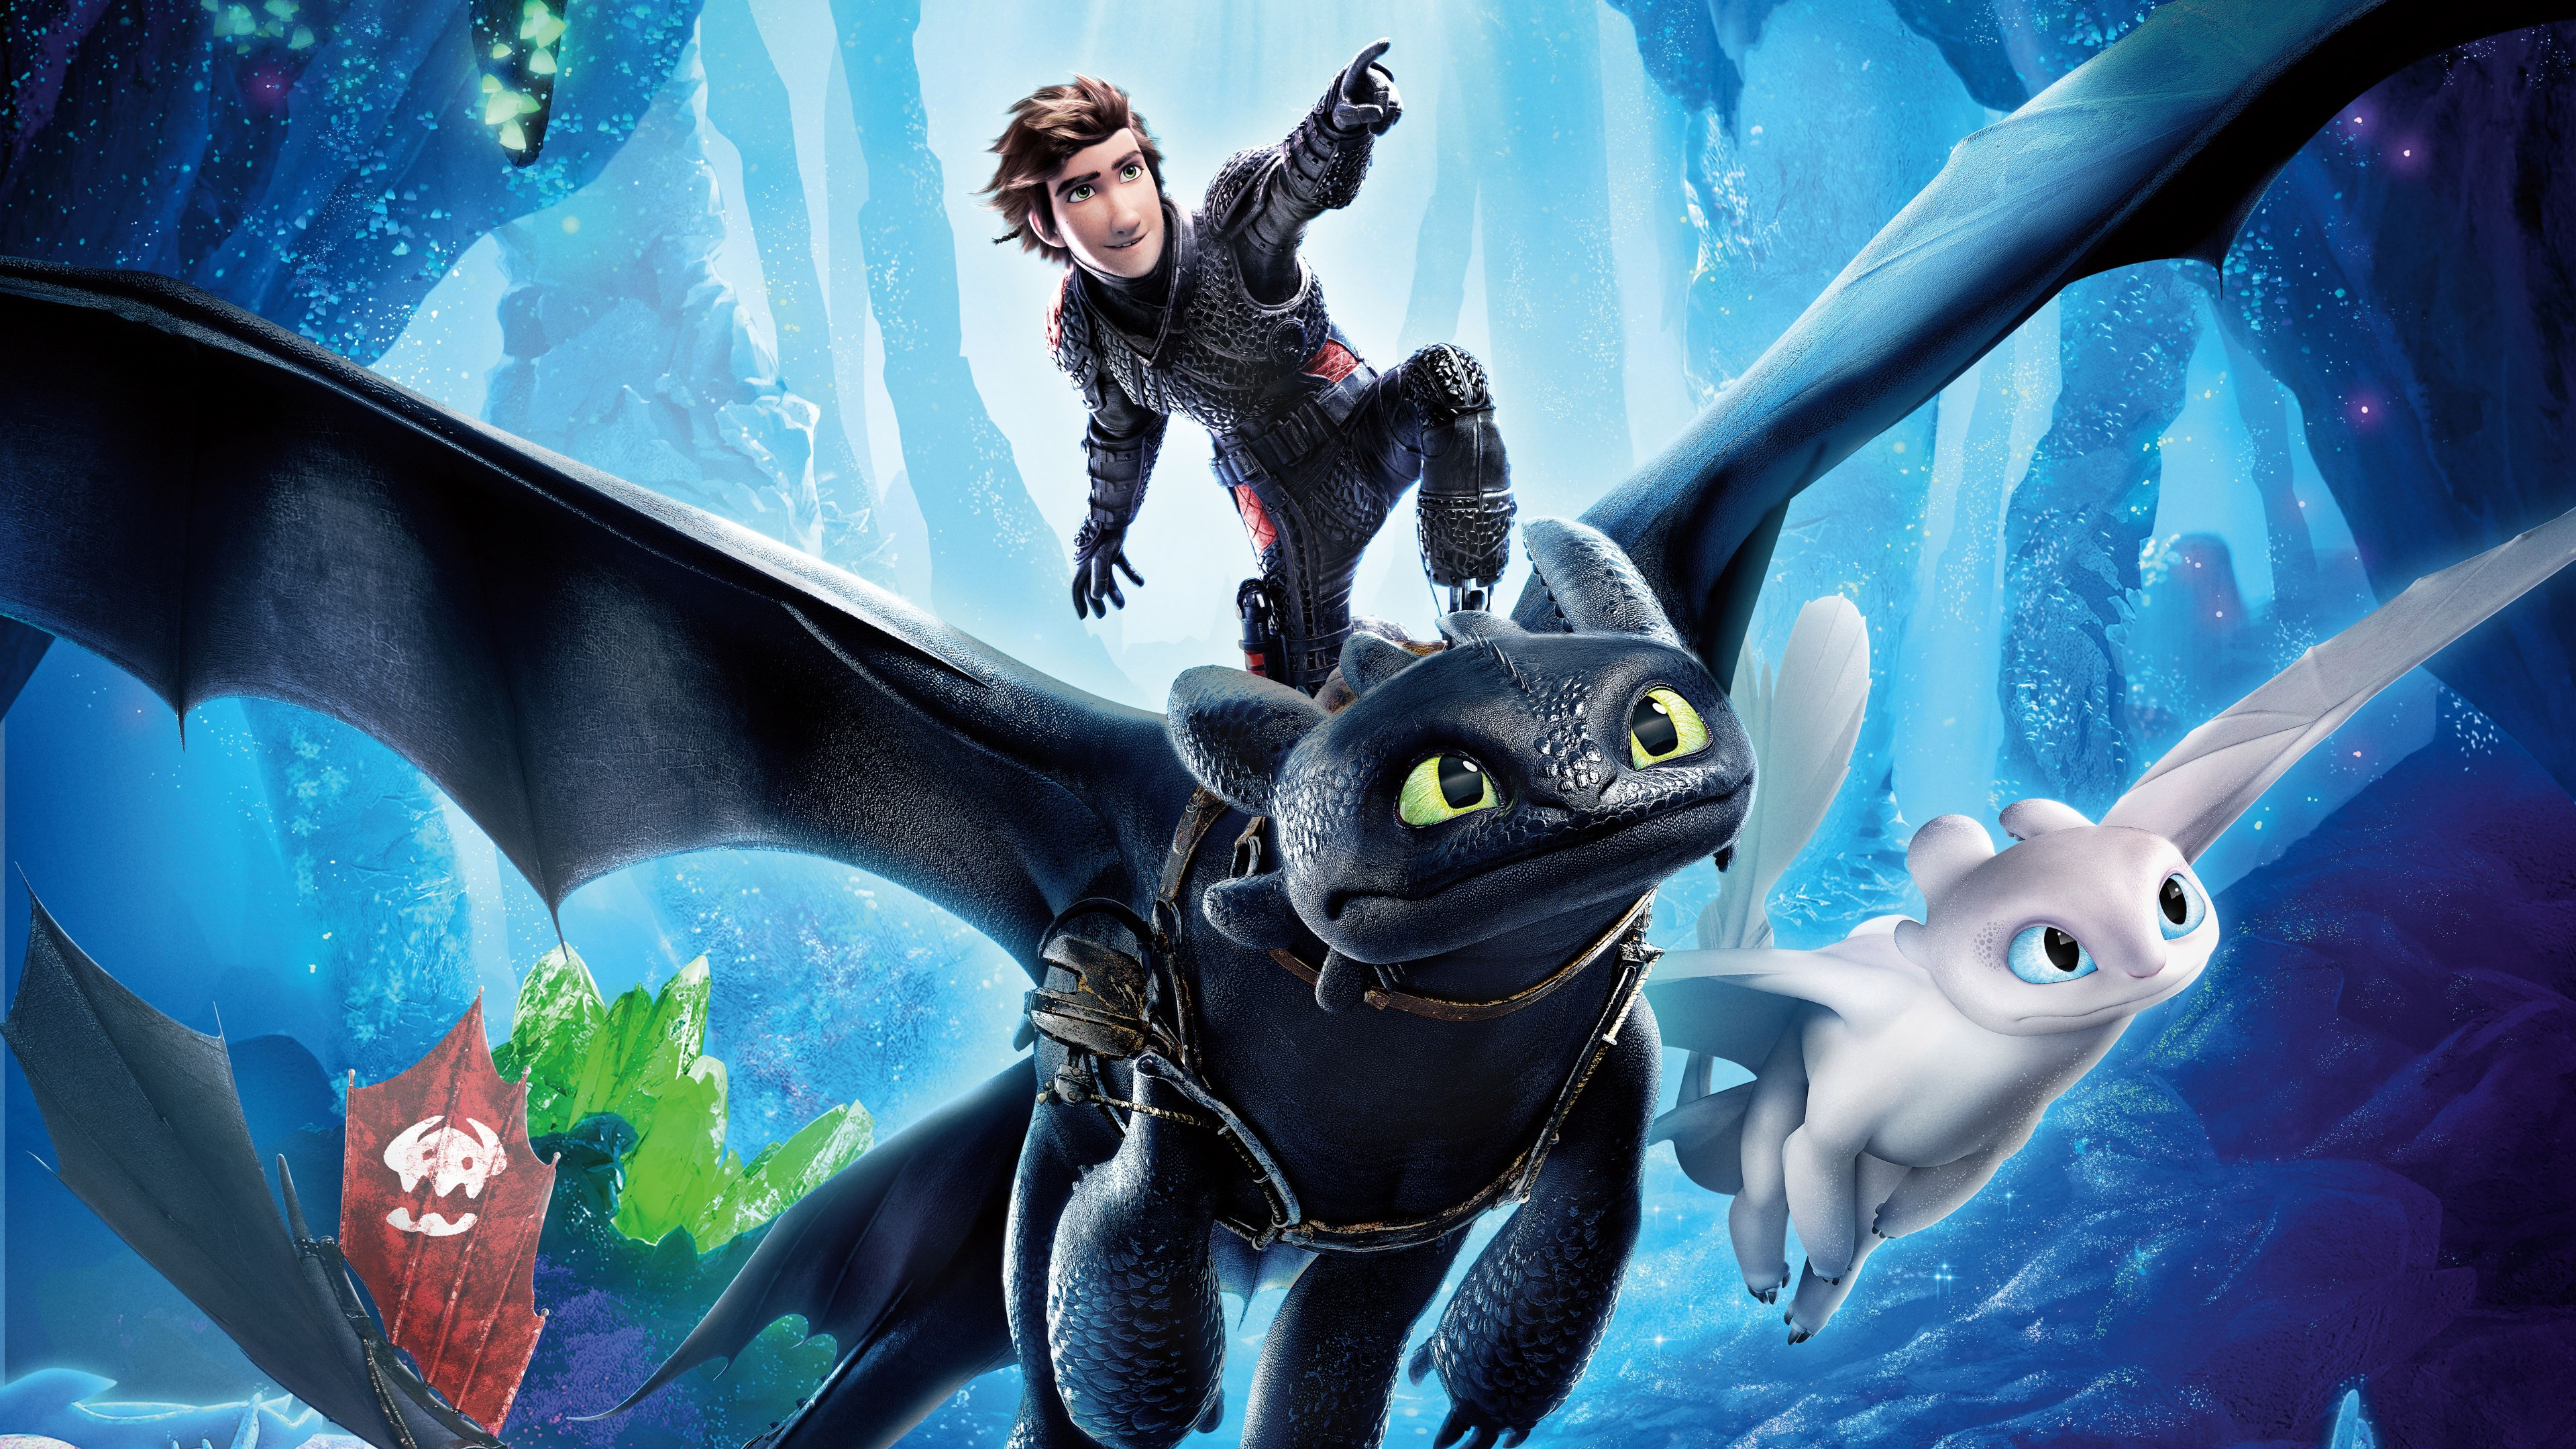 How to Train Your Dragon 2019 wallpaper 3840x2160